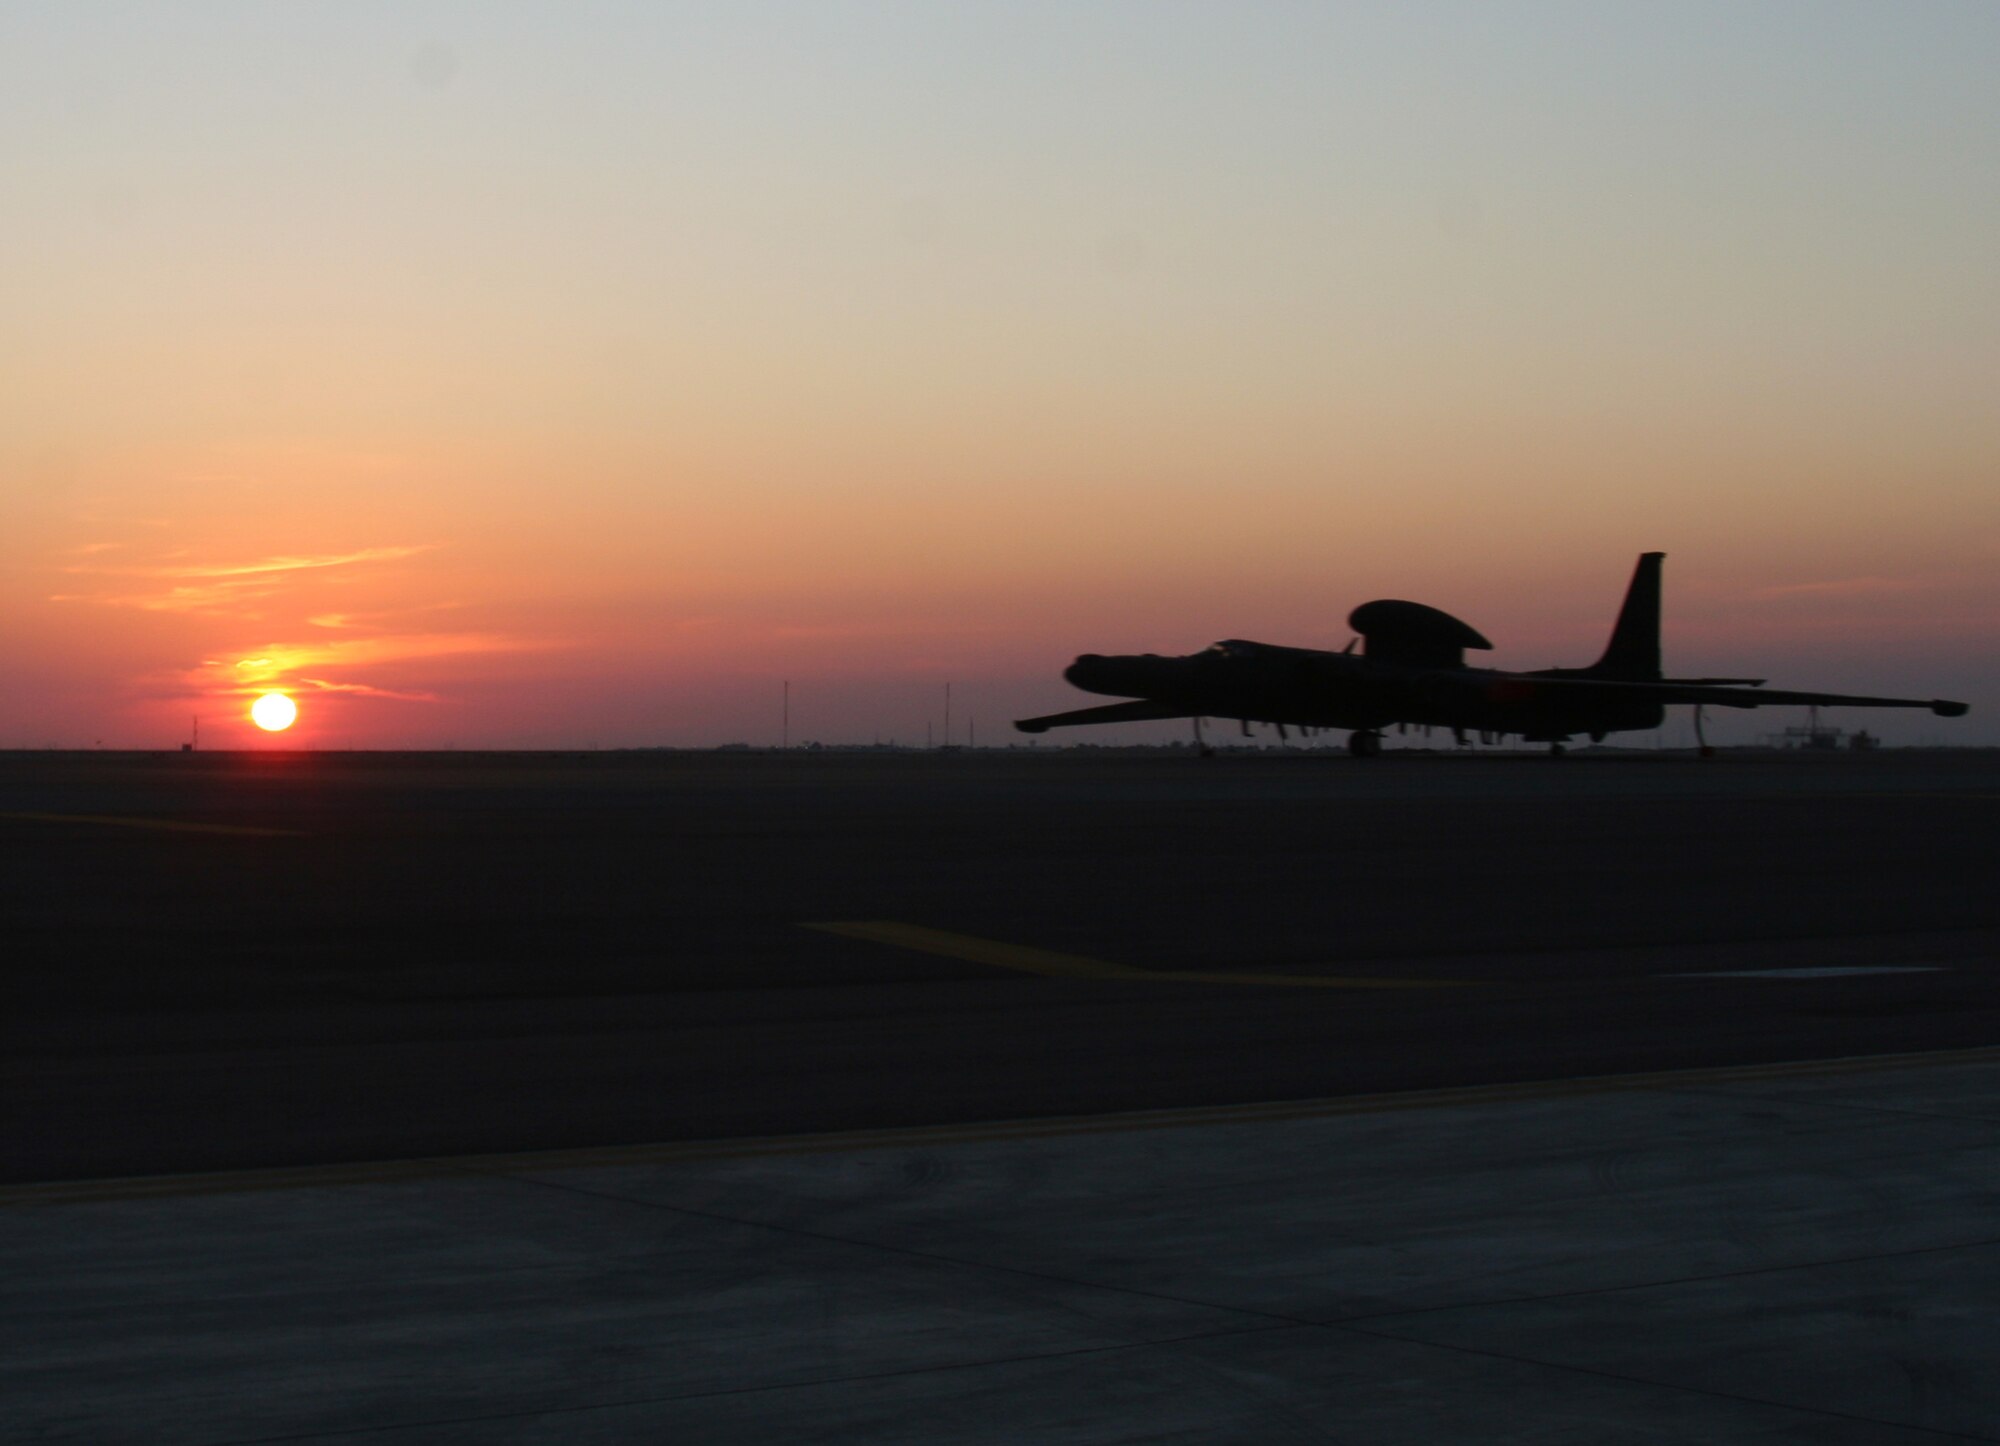 A U-2 Dragonlady aircraft assigned to the 380th Air Expeditionary Wing taxis down the runway at a non-disclosed base in Southwest Asia on Dec. 30, 2009, after completing a mission. The U-2 provides high-altitude, all-weather surveillance and reconnaissance, day or night, in direct support of U.S. and allied forces. It delivers critical imagery and signals intelligence to decision makers throughout all phases of conflict, including peacetime indications and warnings, low-intensity conflict, and large-scale hostilities. The 380th Air Expeditionary Wing supports Operations Iraqi Freedom and Enduring Freedom and the Combined Joint Task Force-Horn of Africa.  (U.S. Air Force Photo/Tech. Sgt. Scott T. Sturkol)